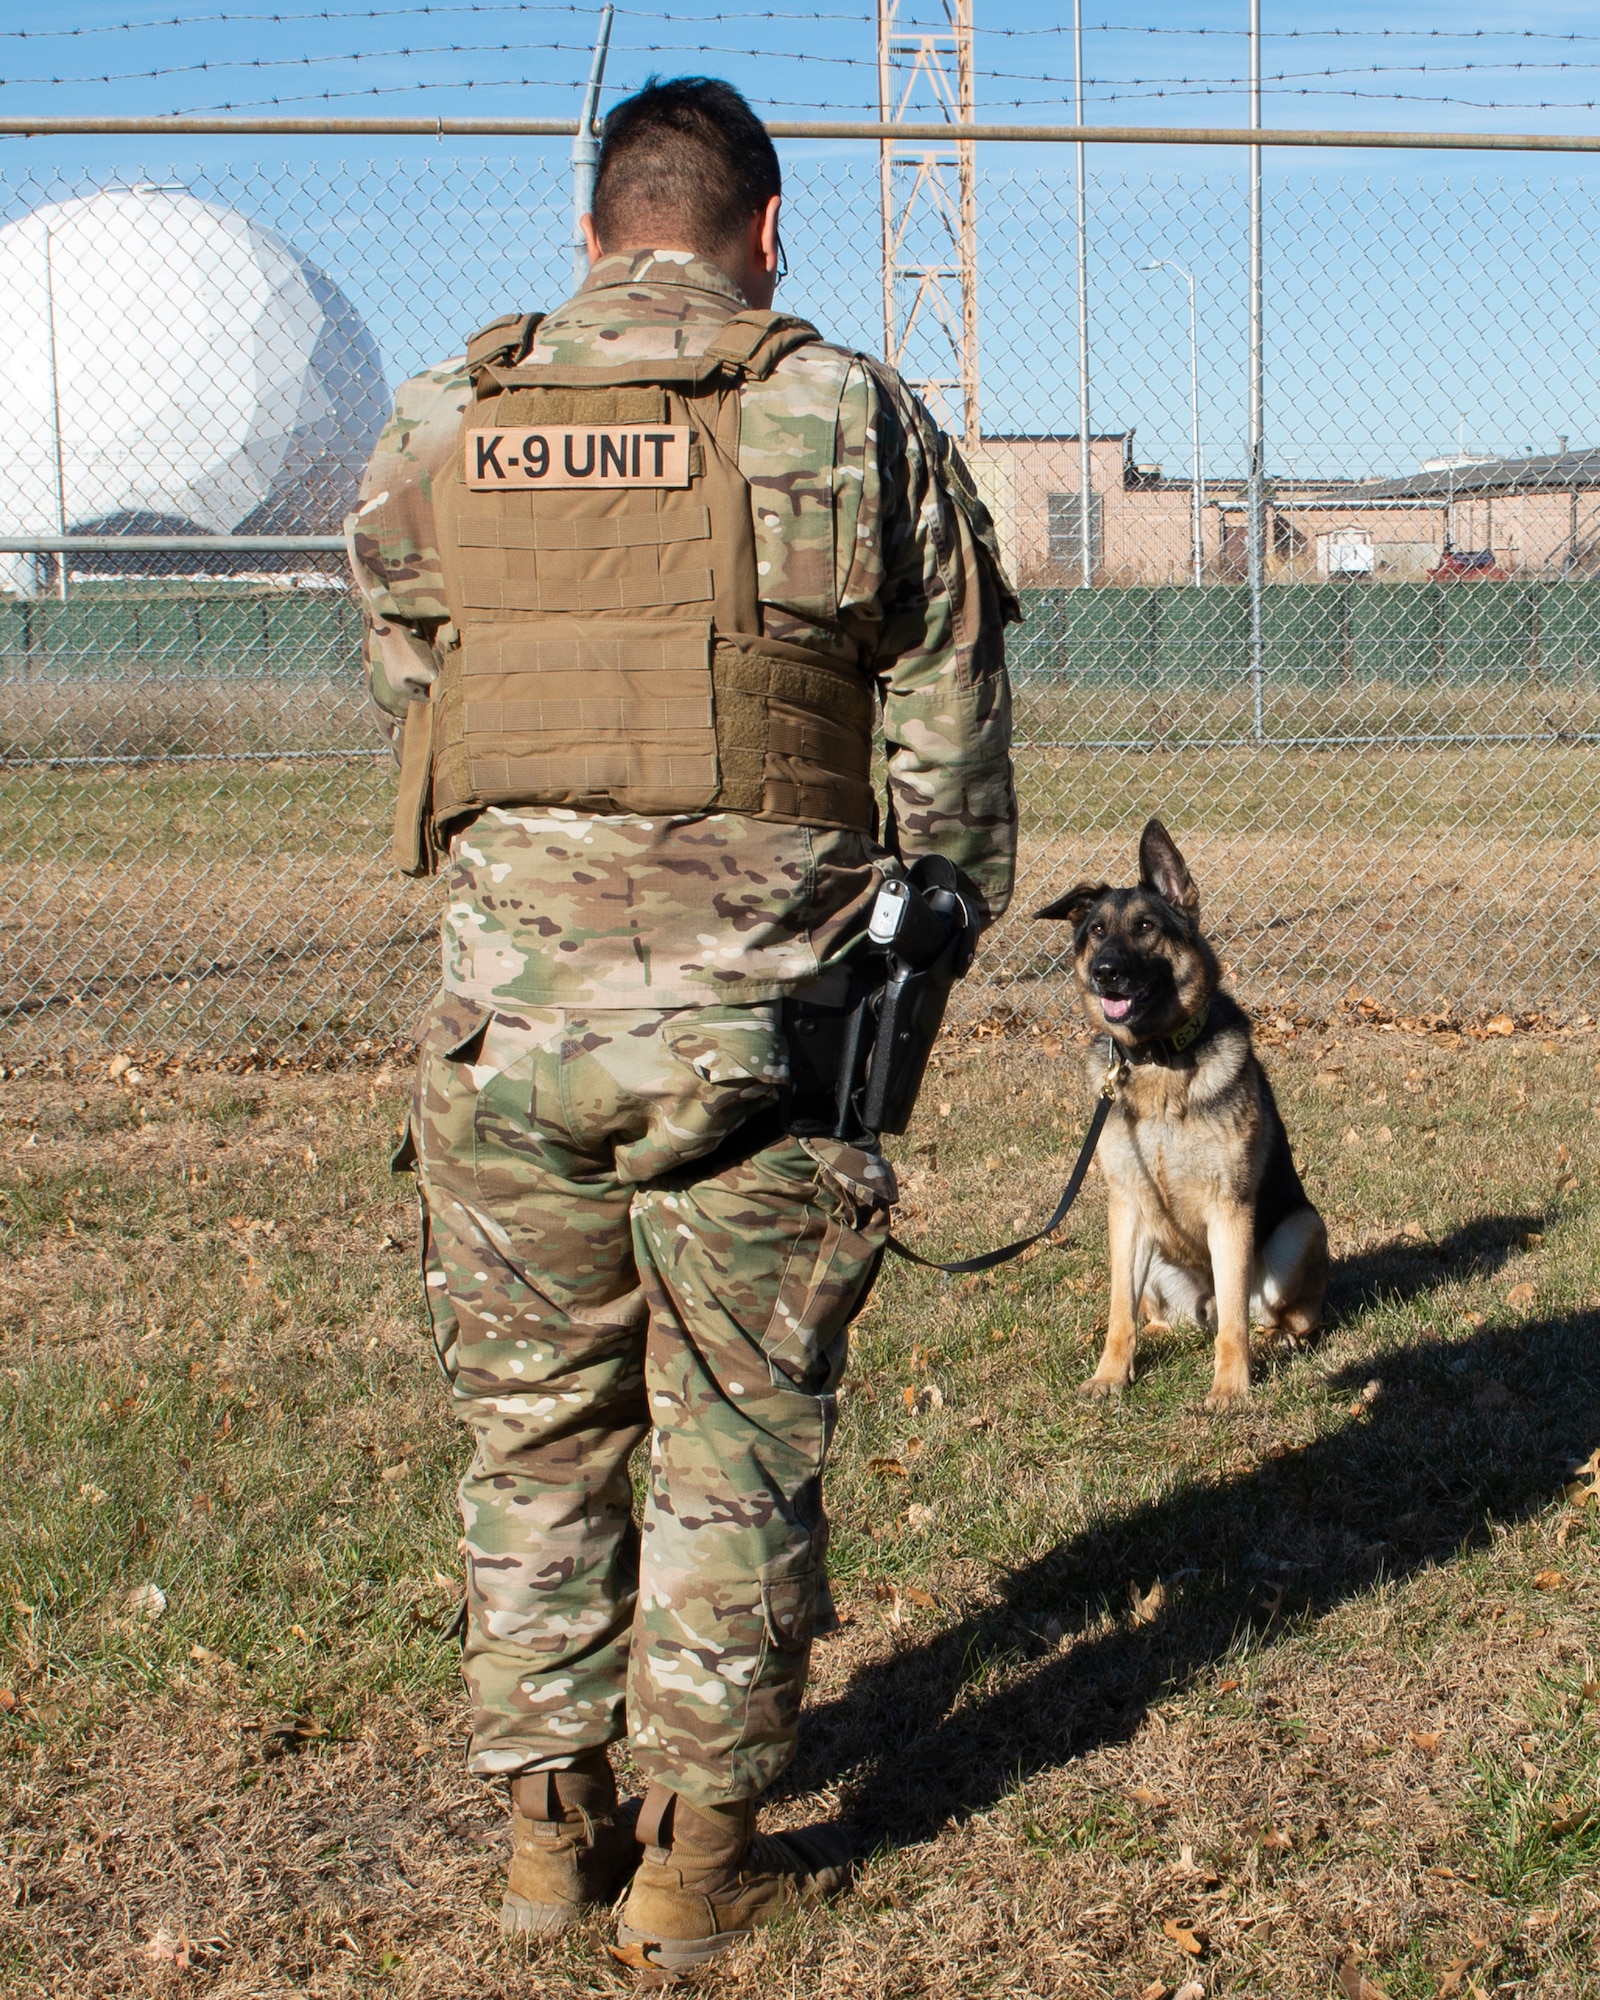 in the foreground a Airman wearing a vest with K9 unit on the backside of vest, he standing in front of a military working dog sitting in front of the Airman